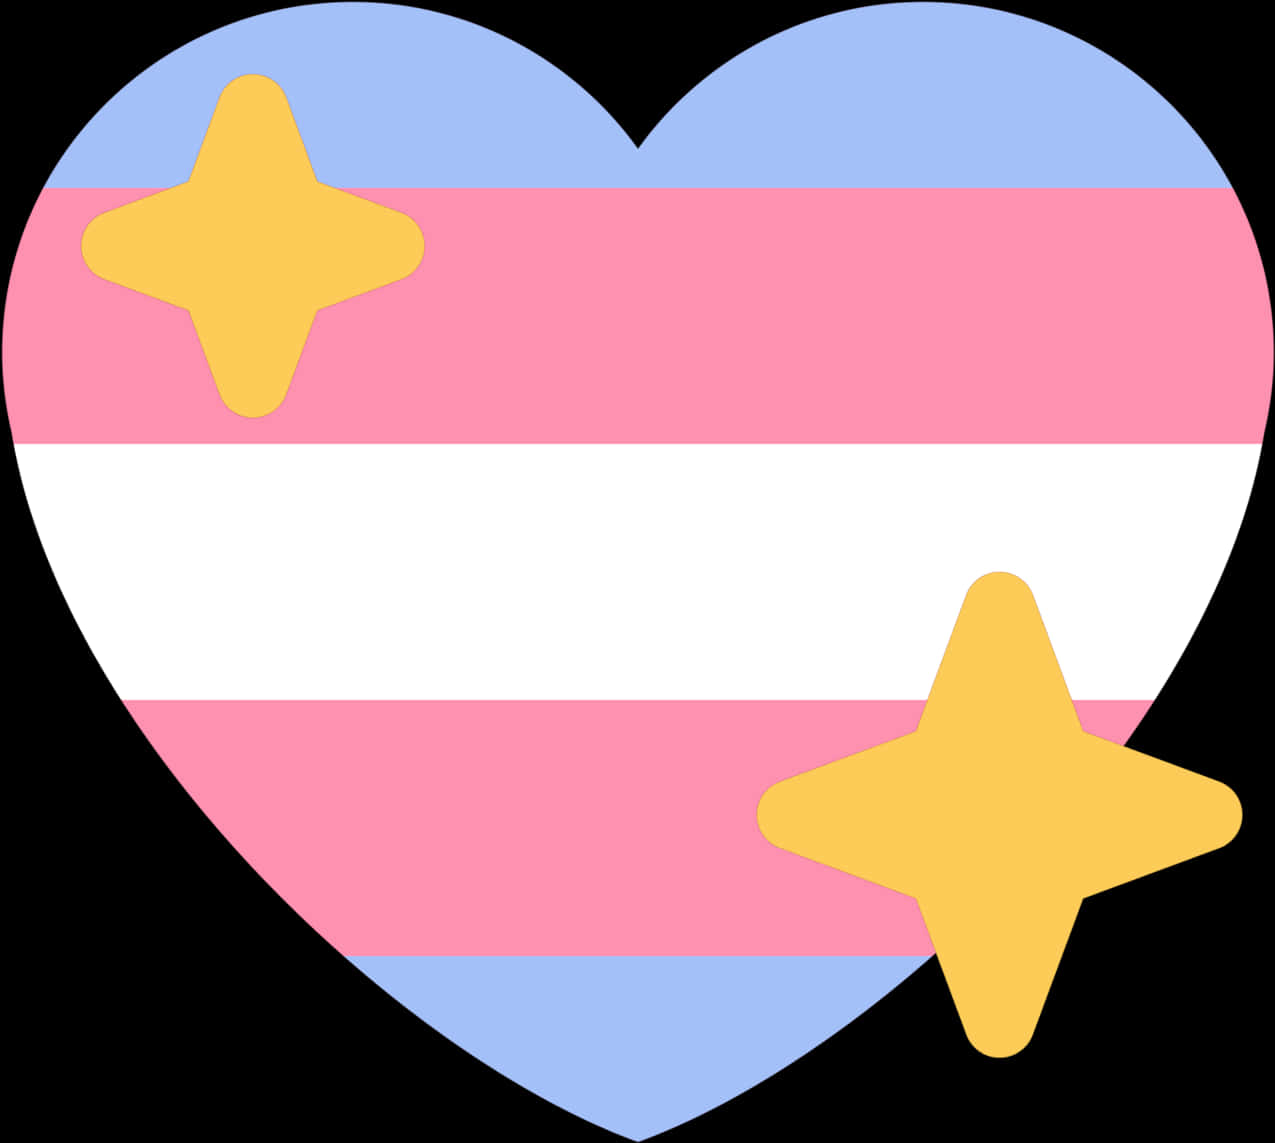 A Heart With A Pink And Blue Stripes And Stars